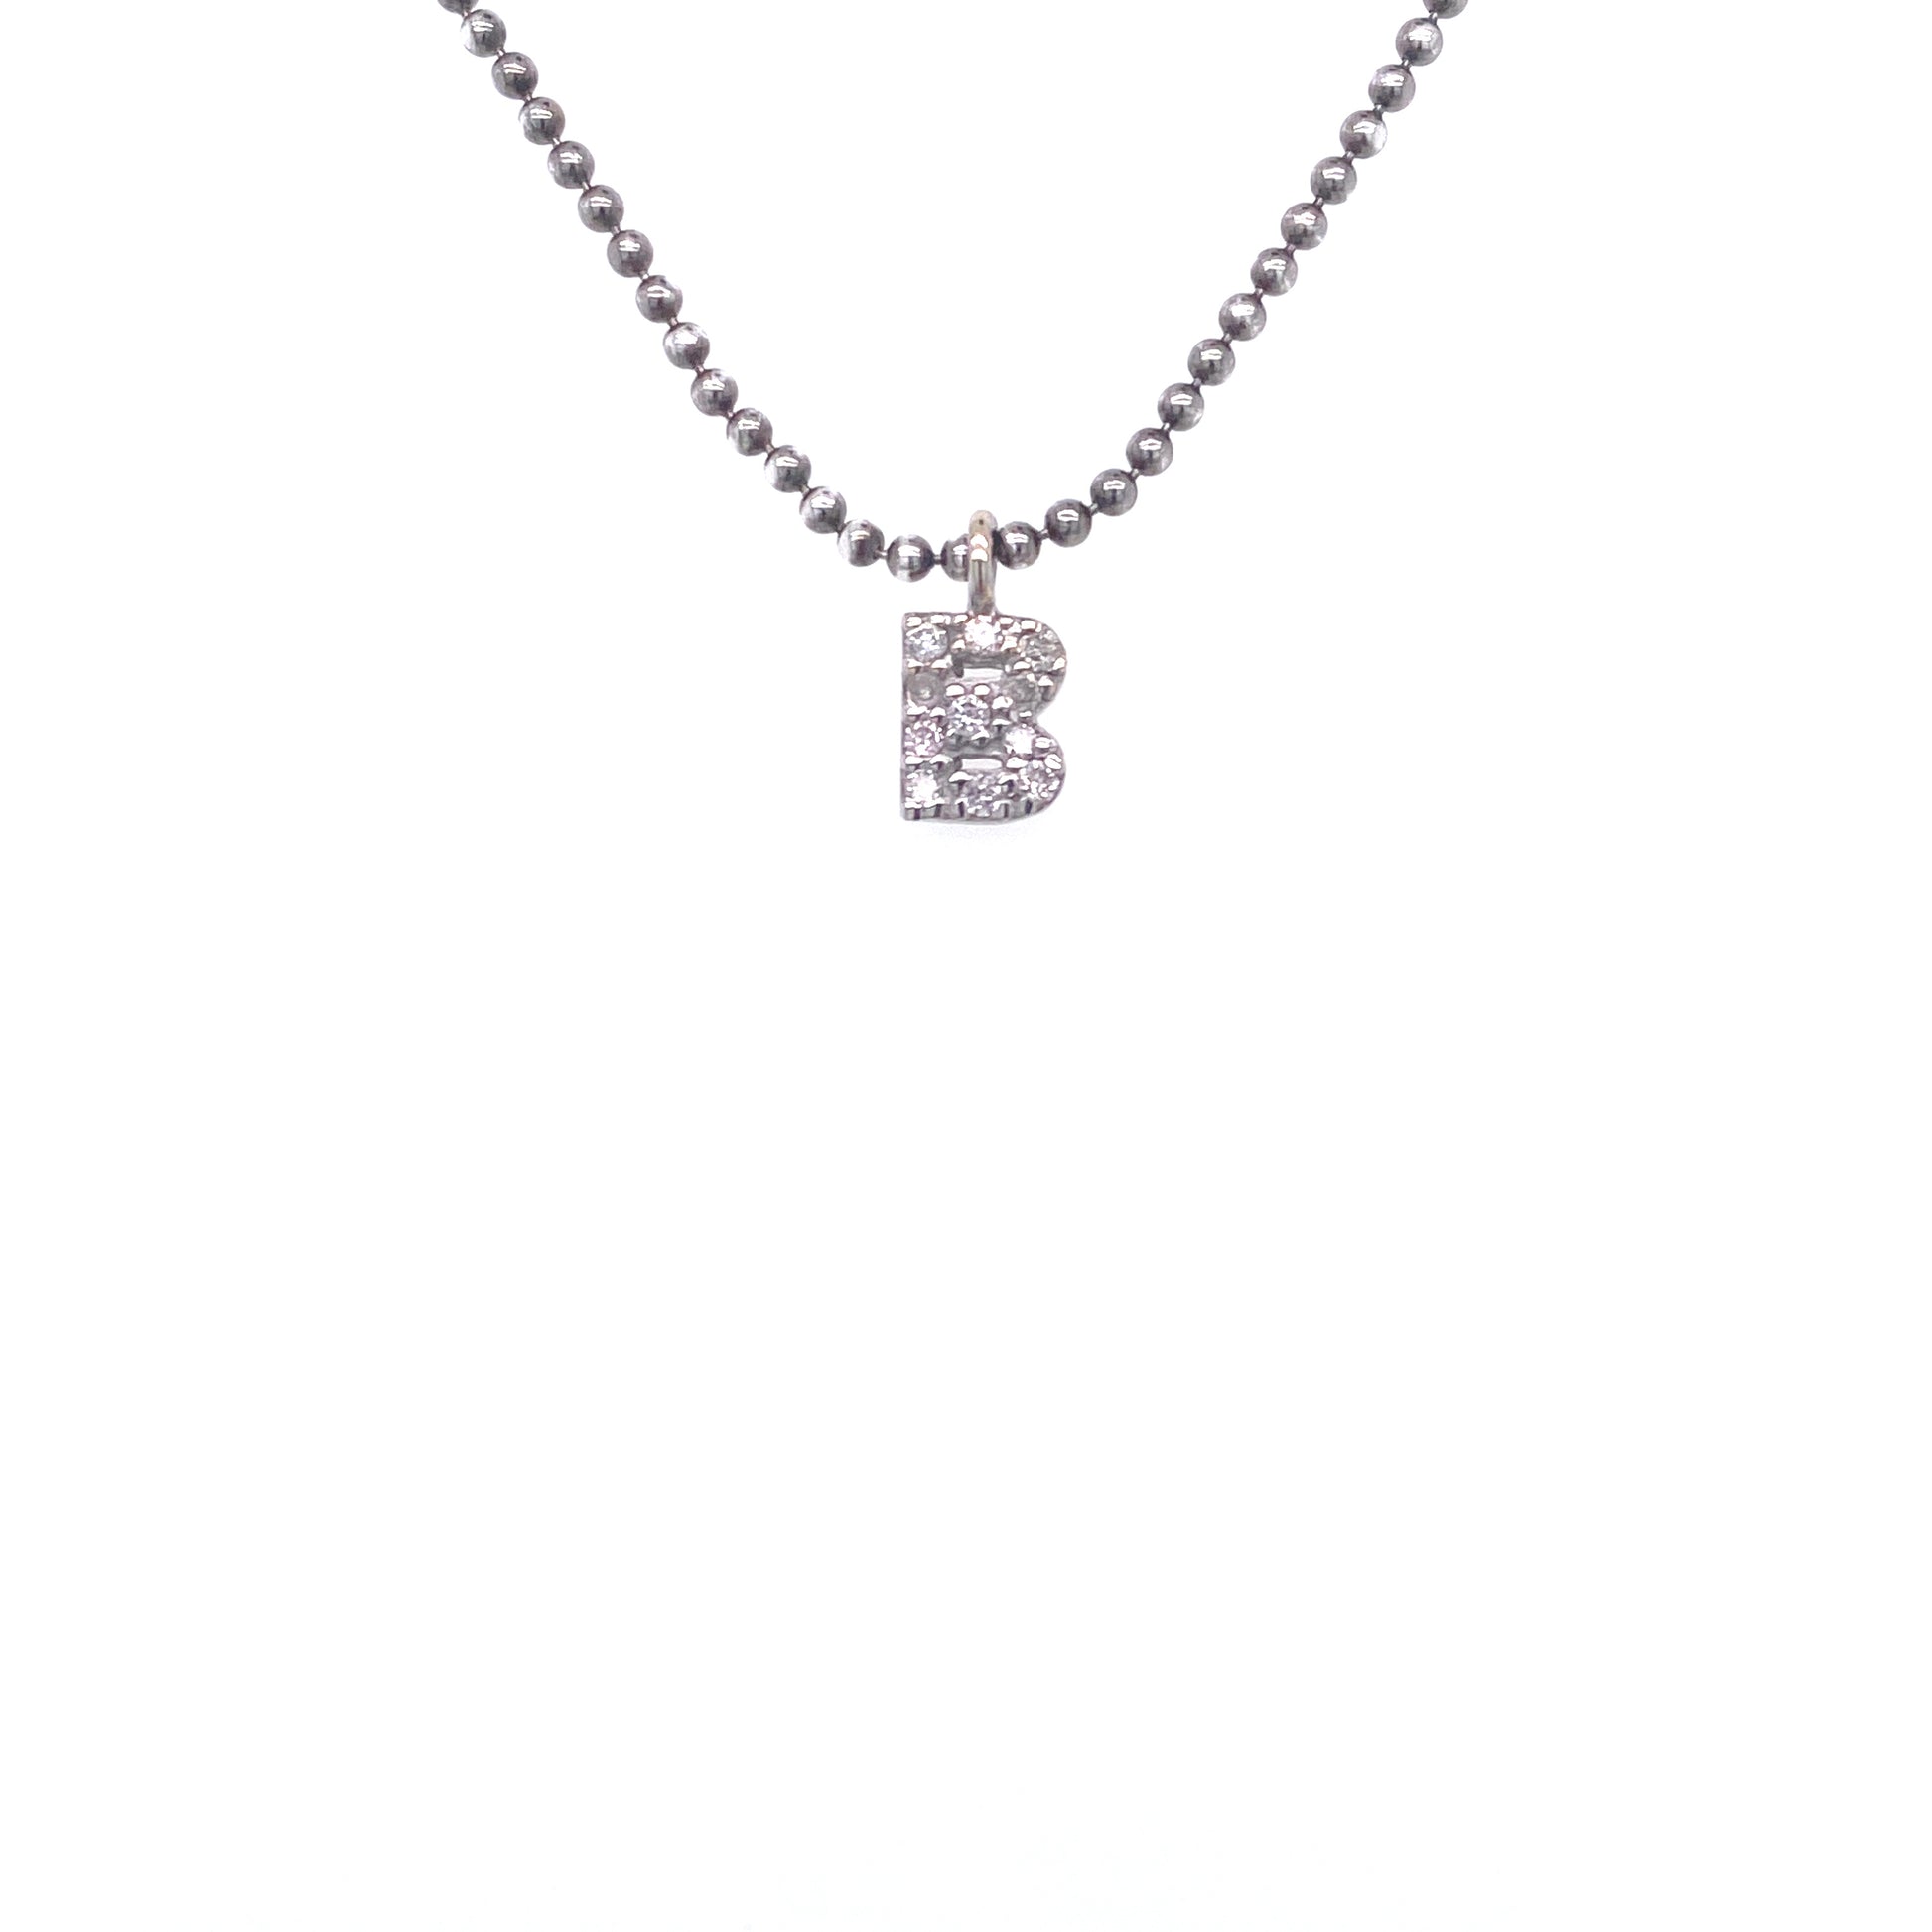 Necklace With Small Initial B and Diamond | Bernat Rubi | Luby 